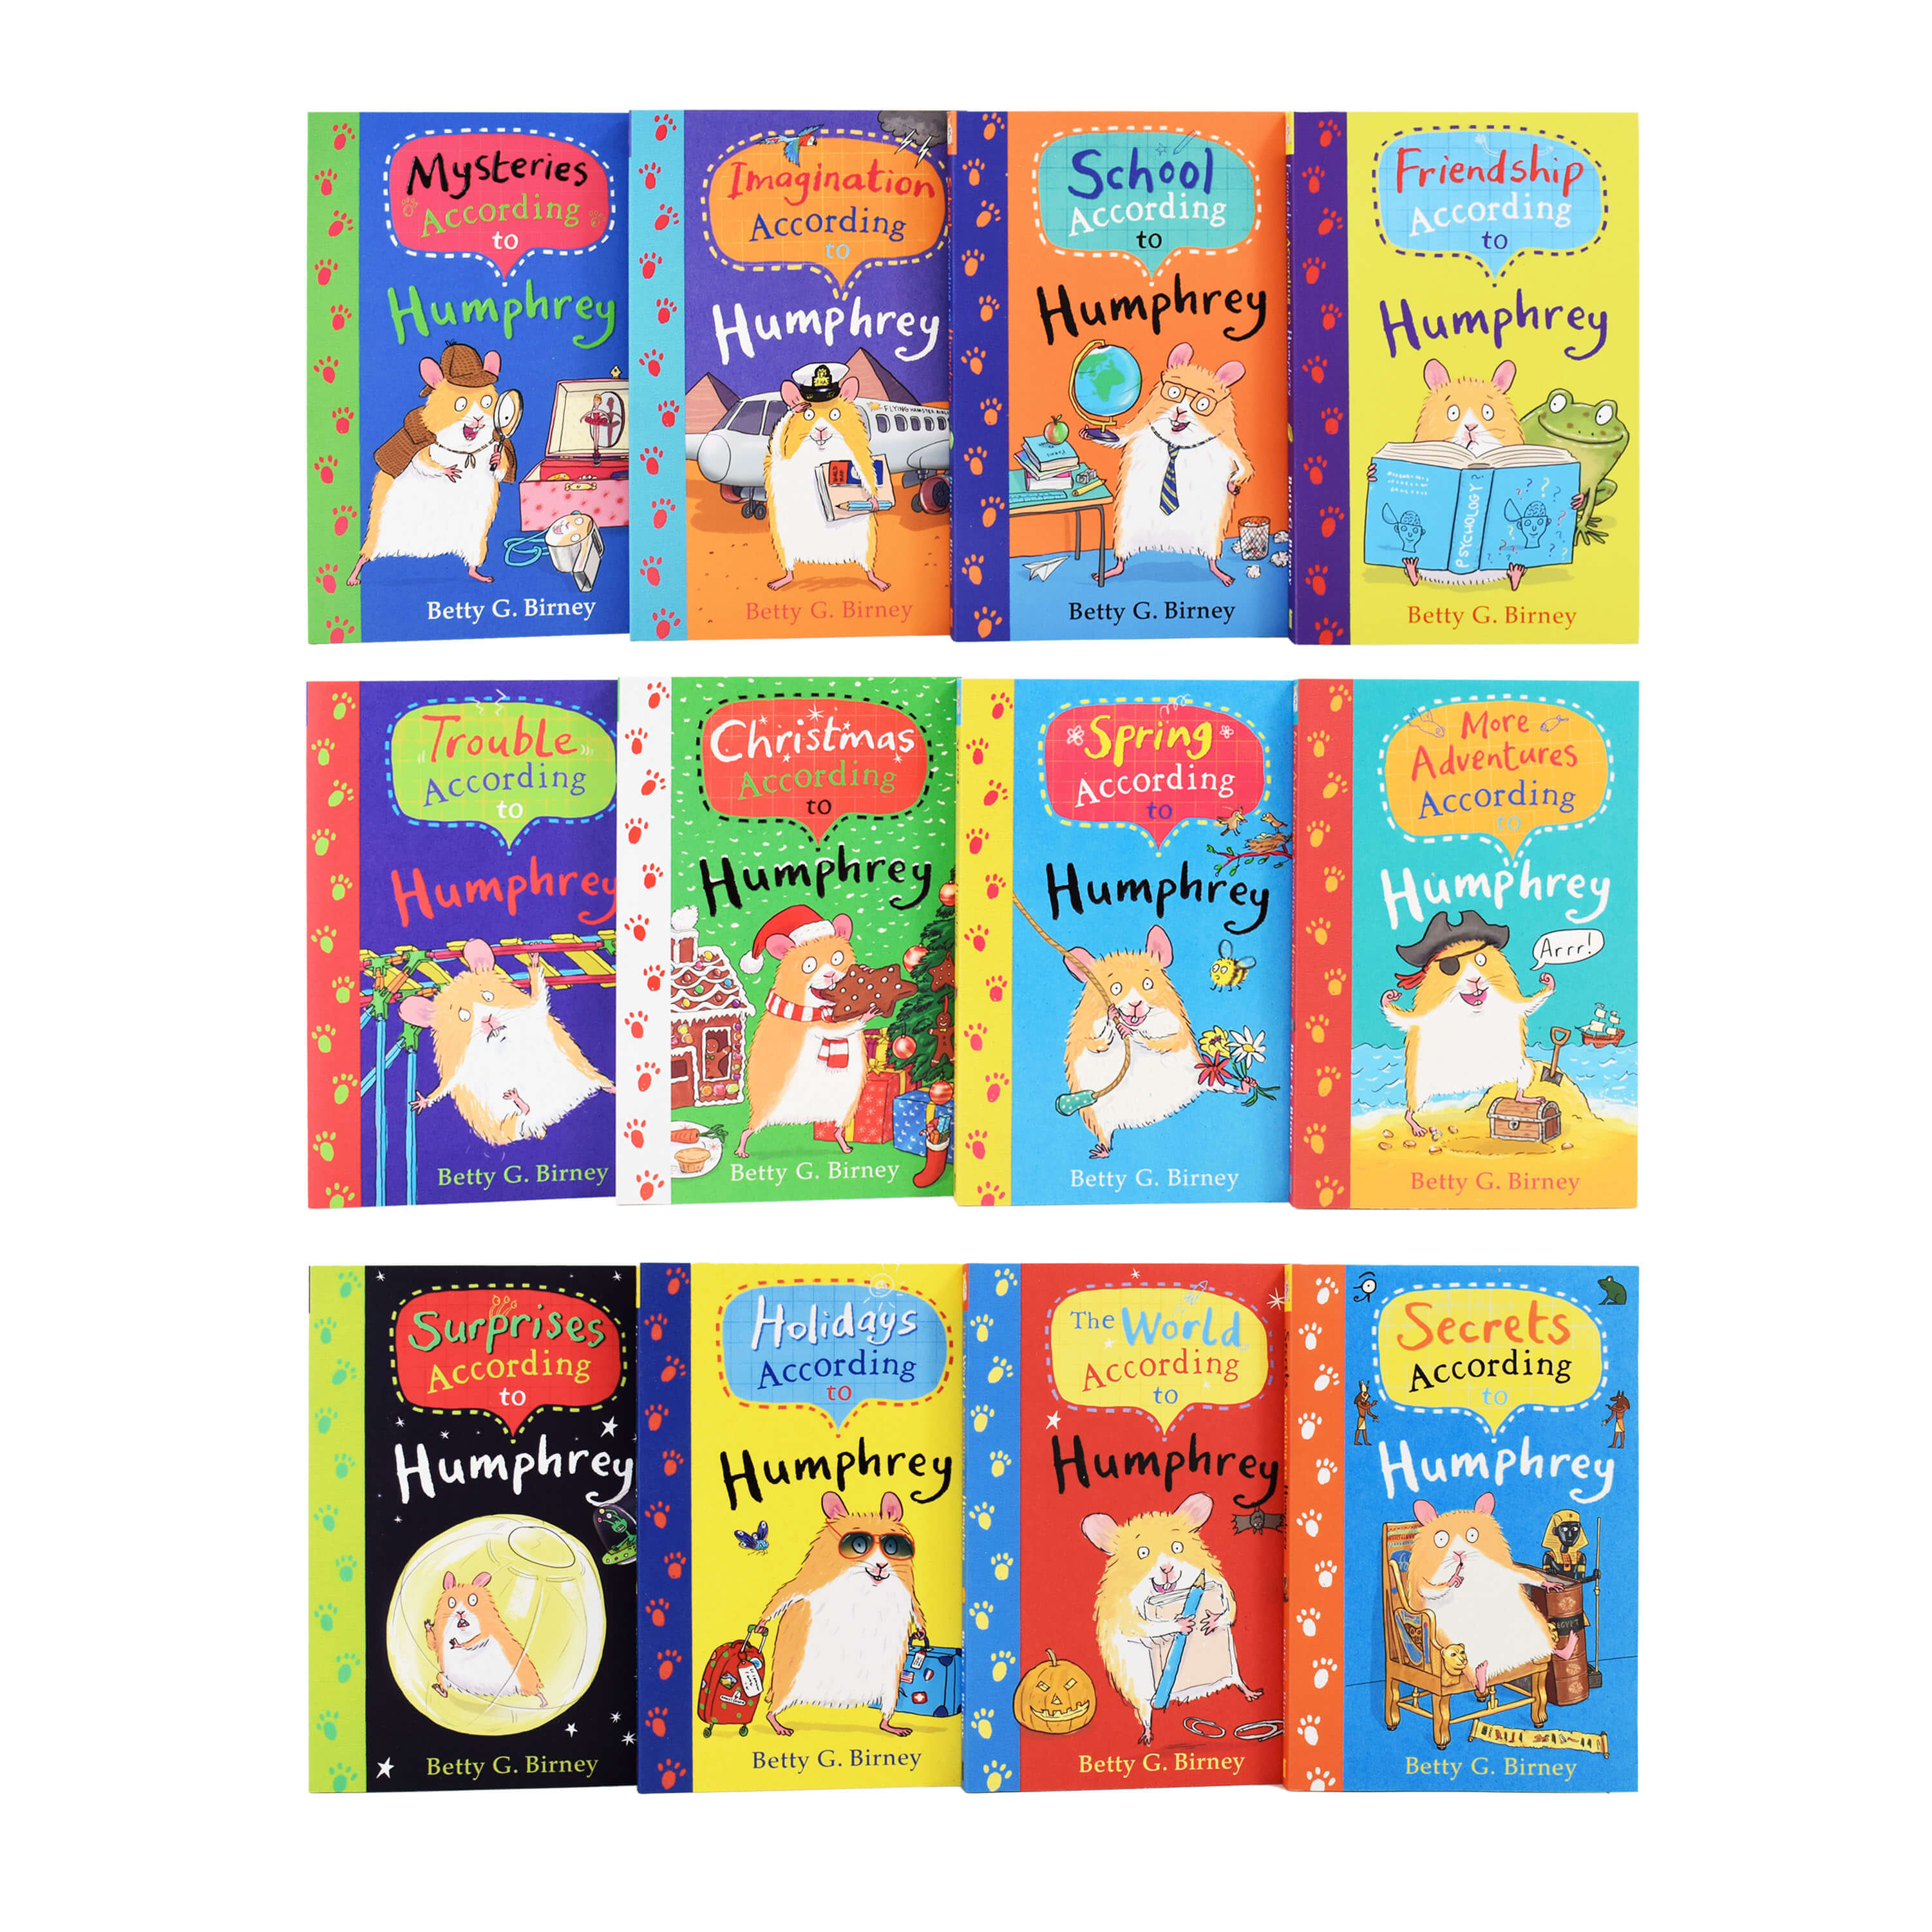 According to Humphrey the Hamster Series 12 Books Children Collection Paperback Set By Betty G. Birney